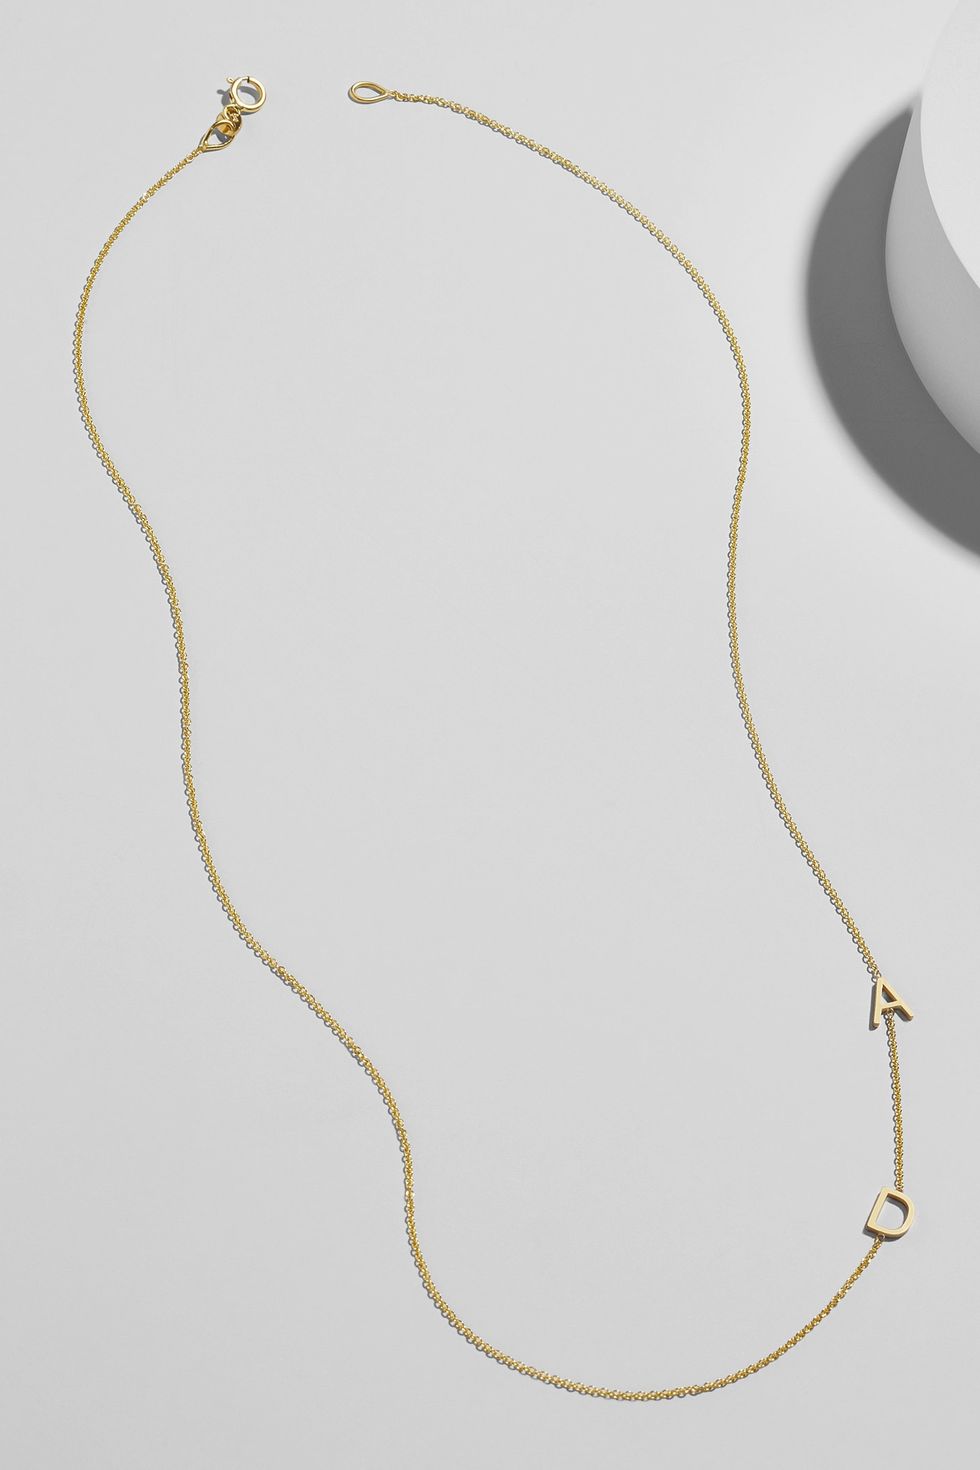 Maya Brenner Asymmetrical Character Necklace